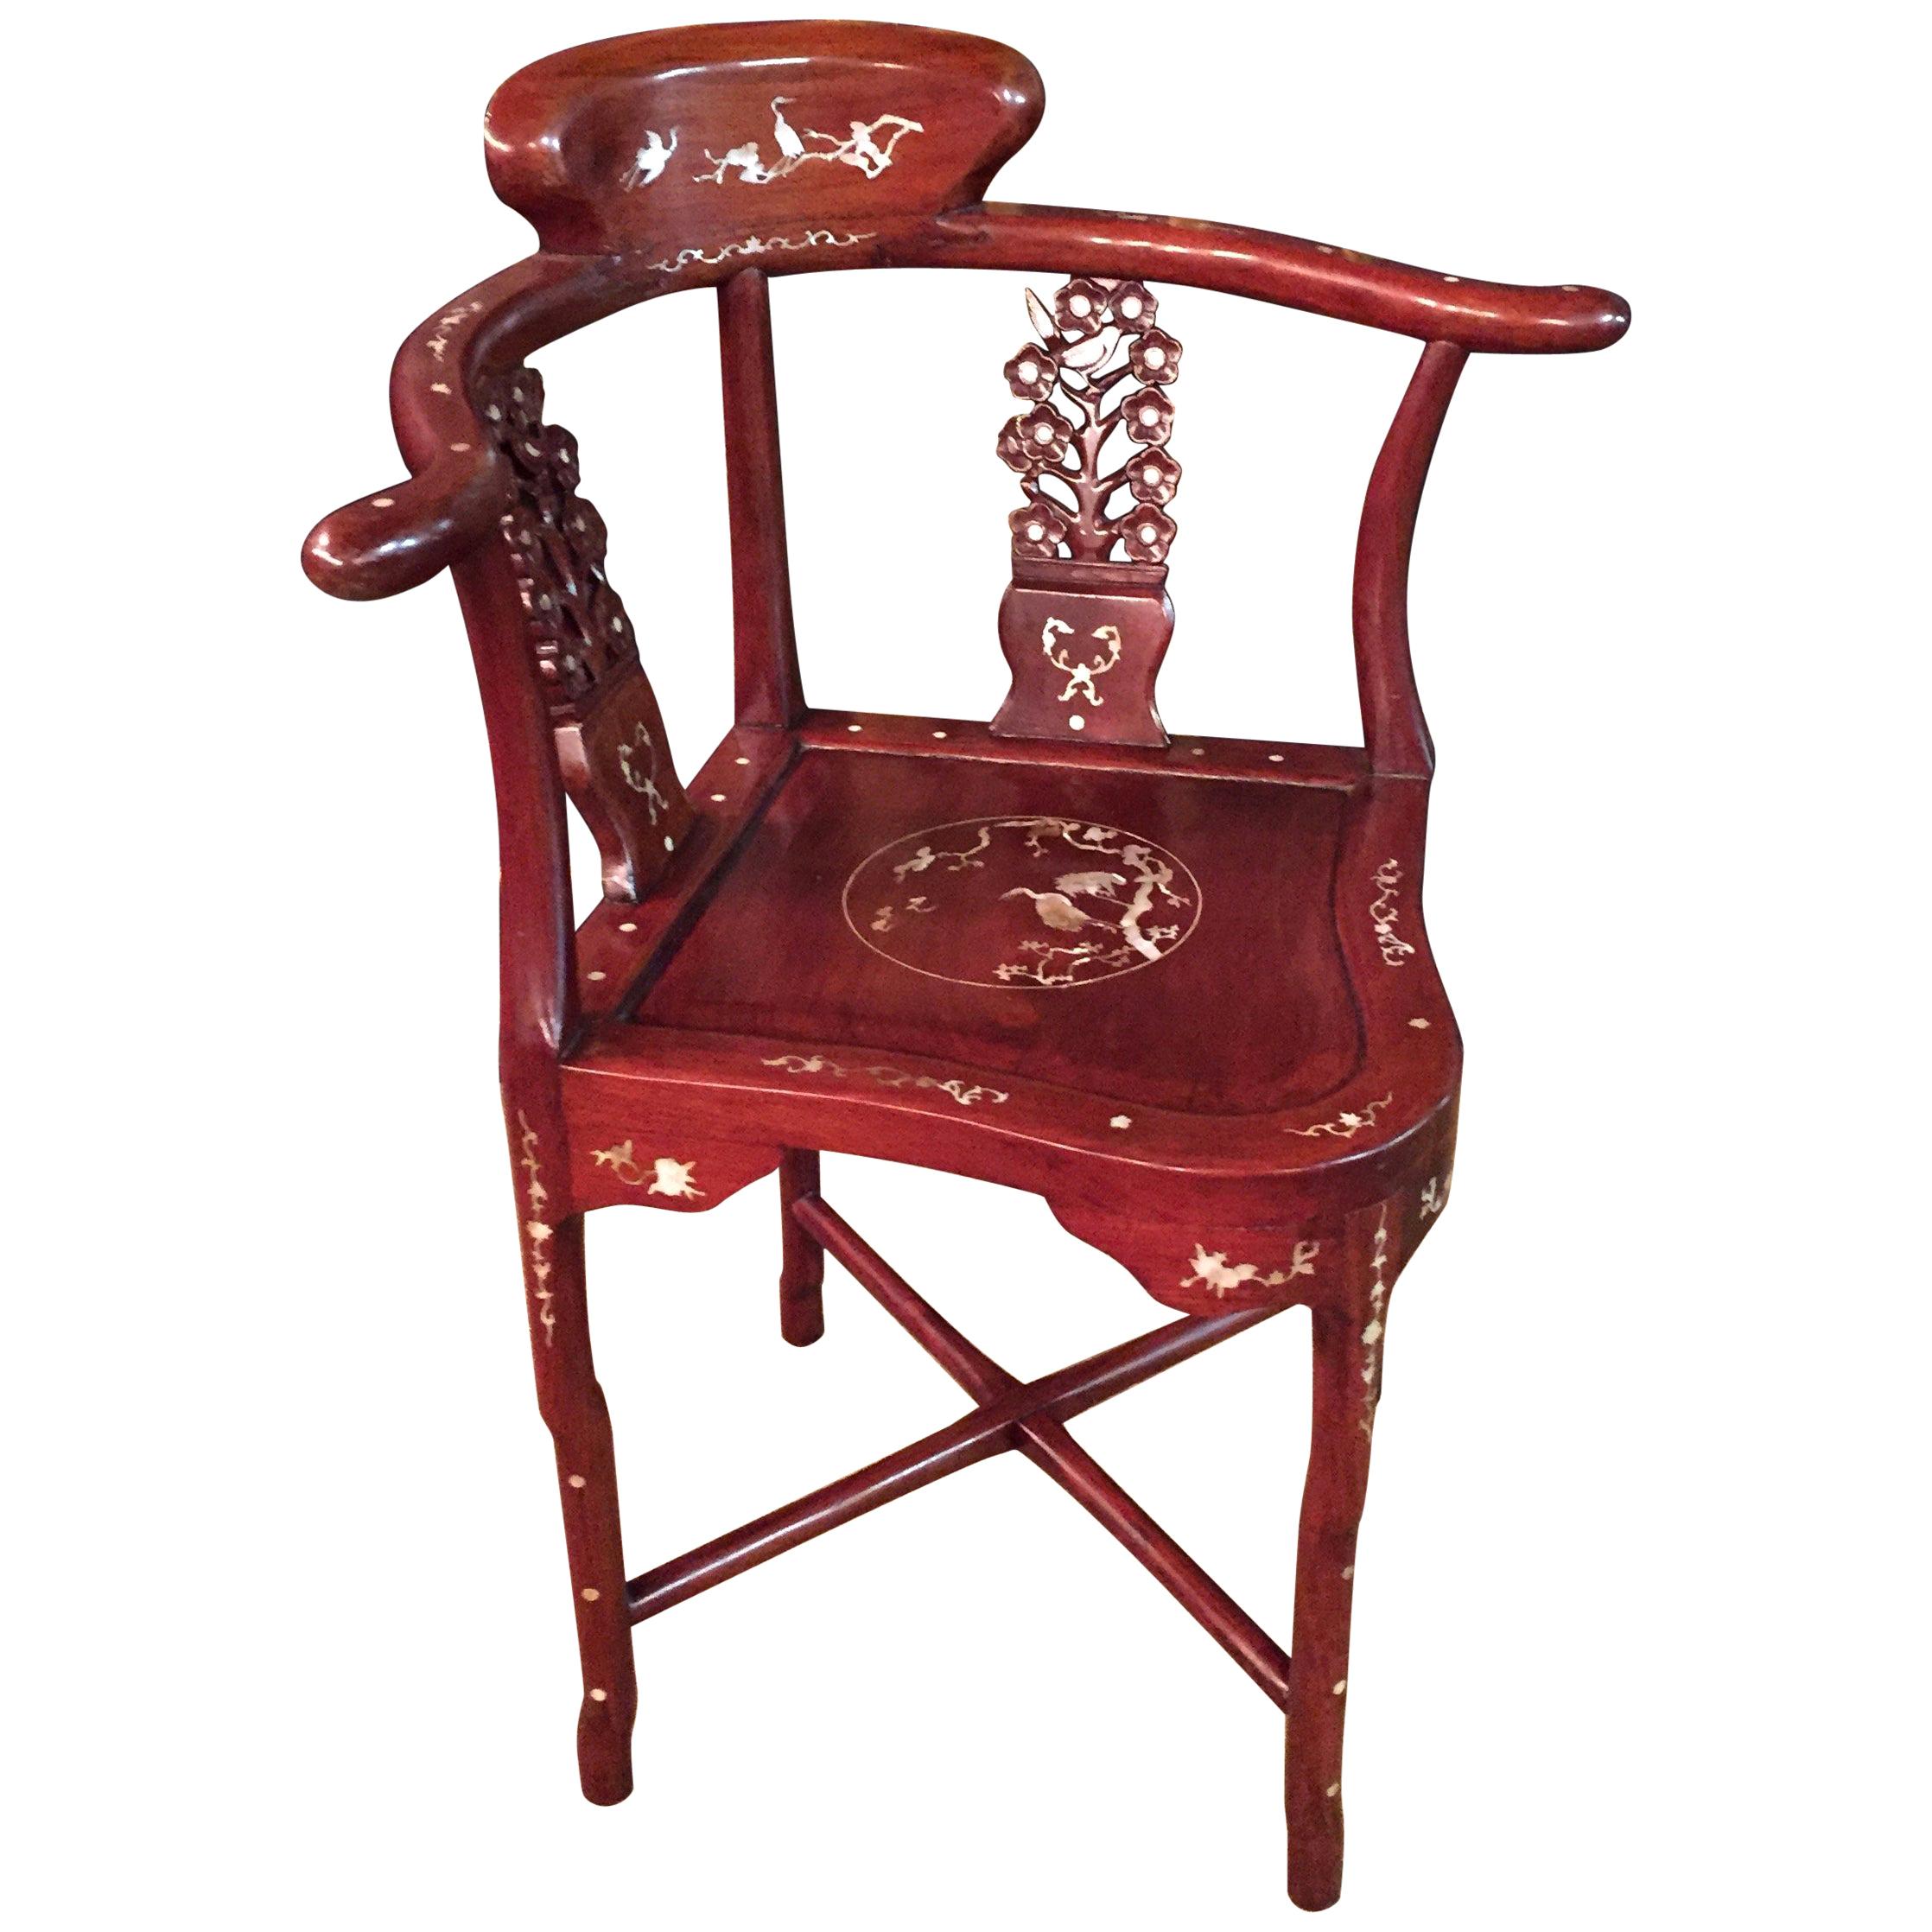 China Corner Chair antique with Mother of Pearl Inlays hardwood  For Sale